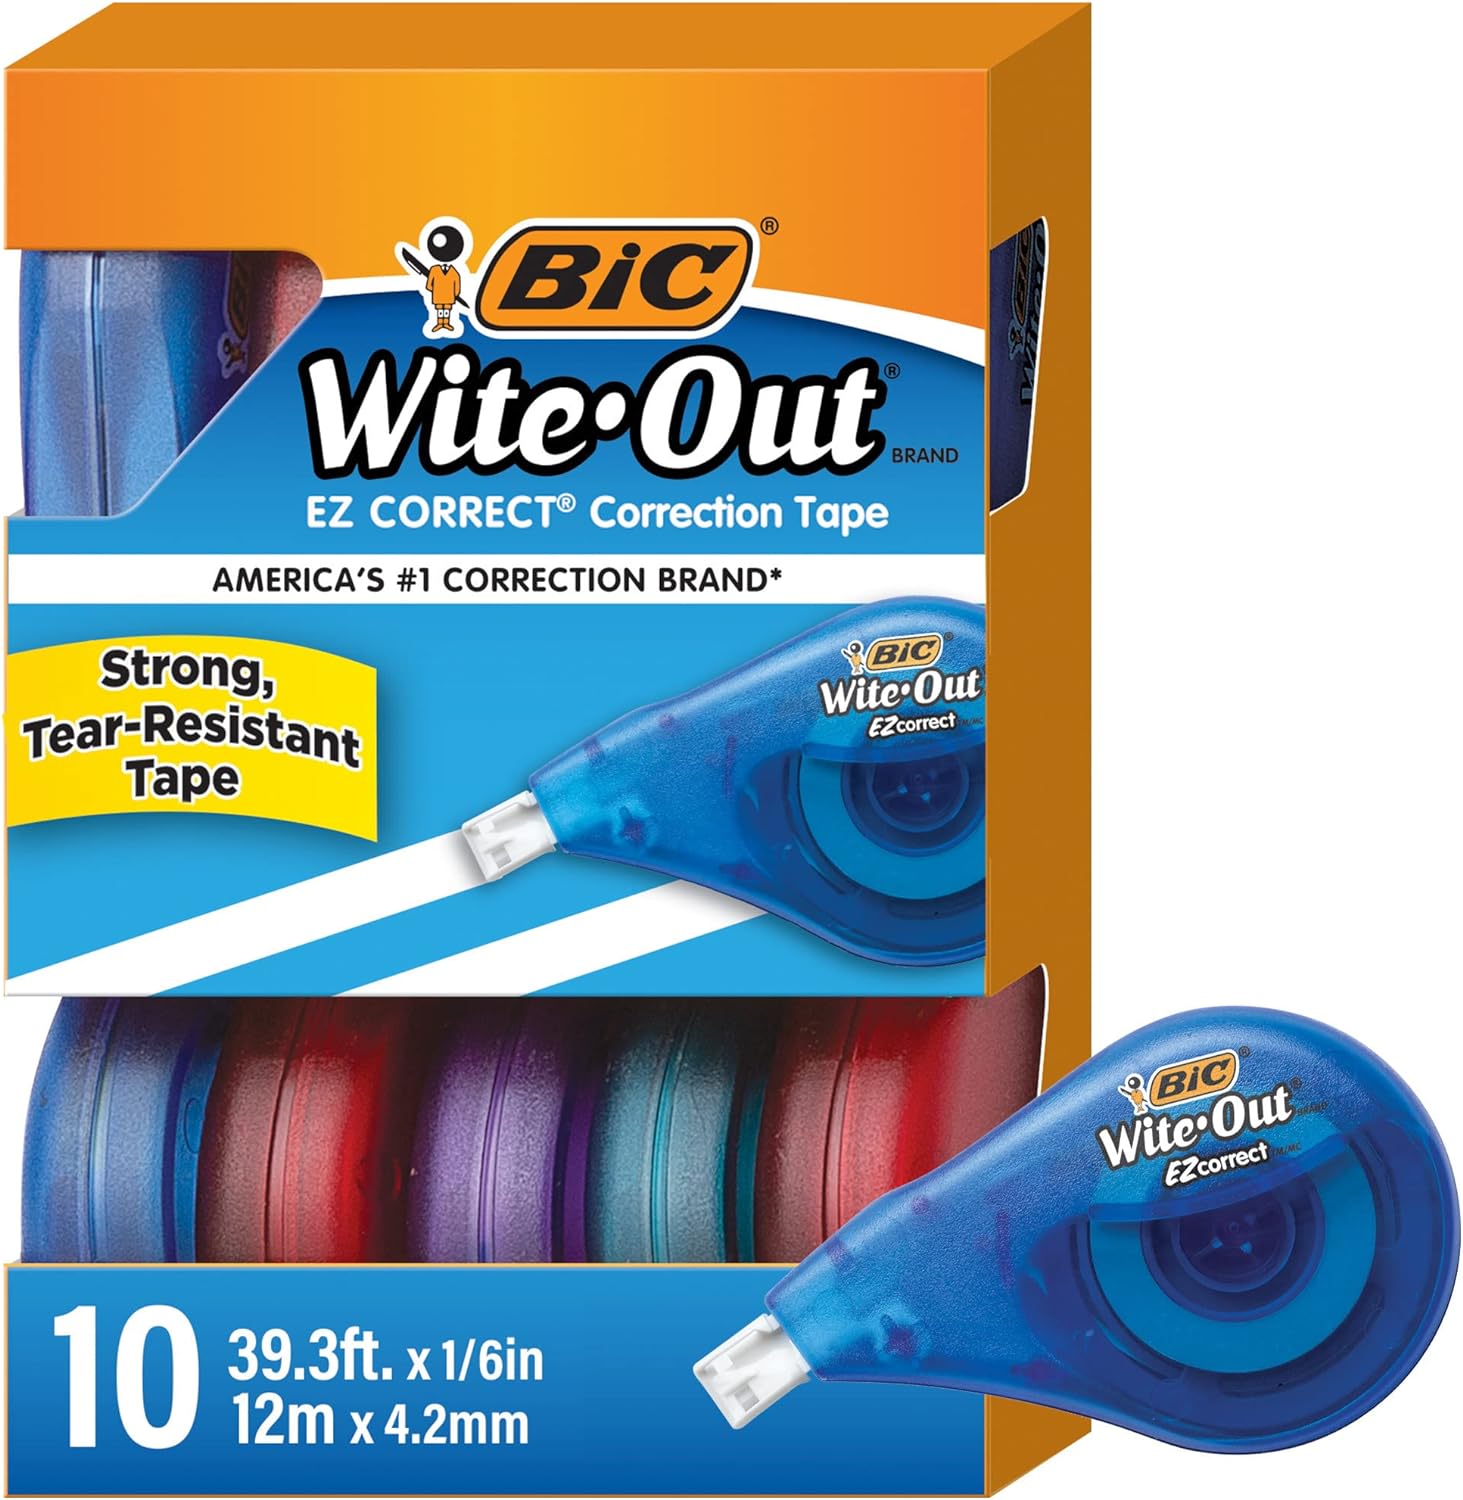 This white out tape will last forever and the multi-pack is a great bargain. It works well and is easy to use, it even applies to previously taped paper. I'm happy with this purchase and would buy it again.